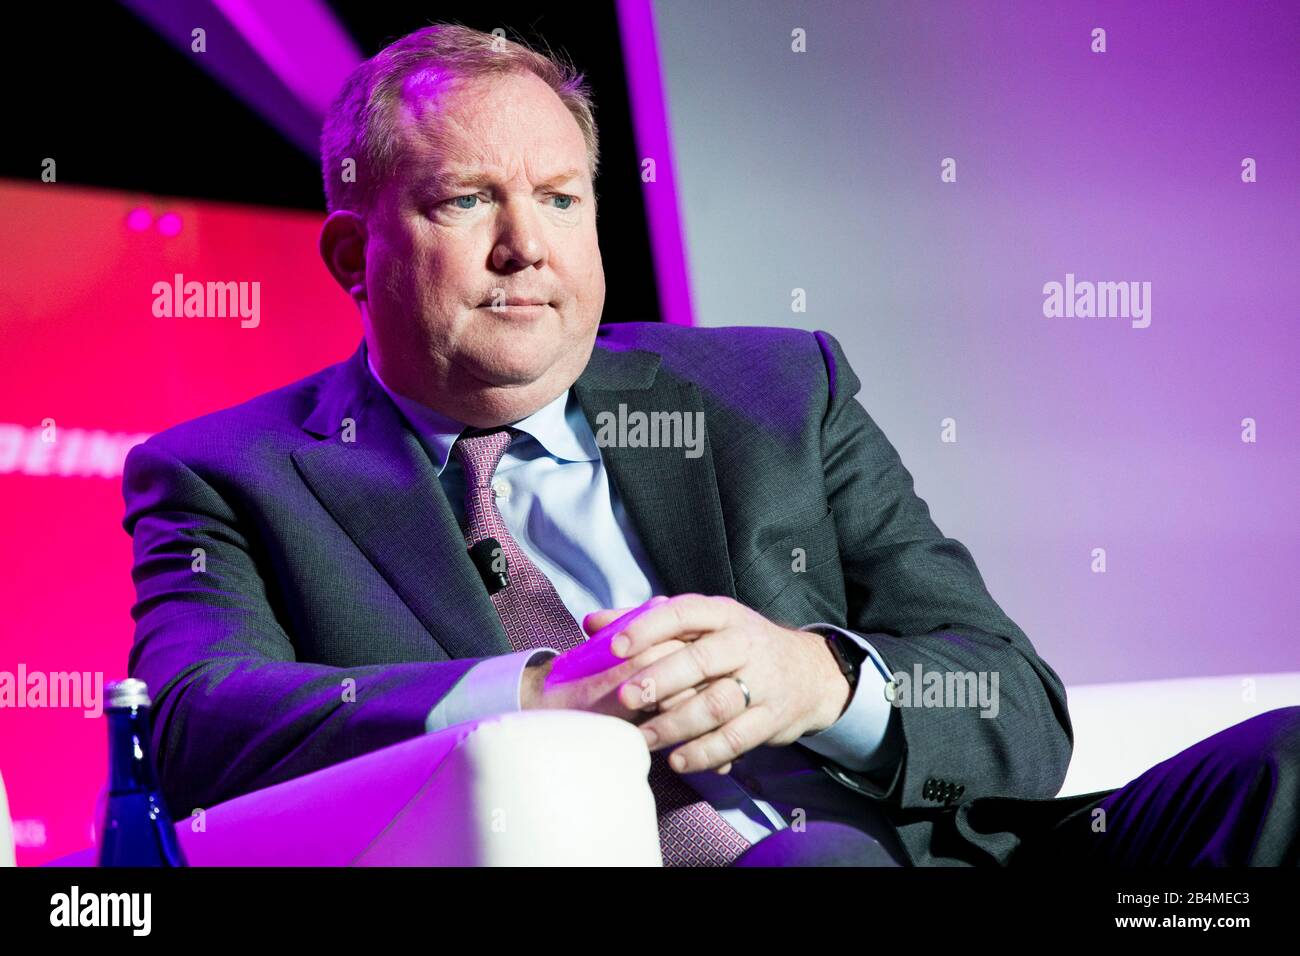 Stanley Deal, President und Chief Executive Officer, Boeing Commercial Airplanes und Executive Vice President, The Boeing Company, spricht in den USA Stockfoto